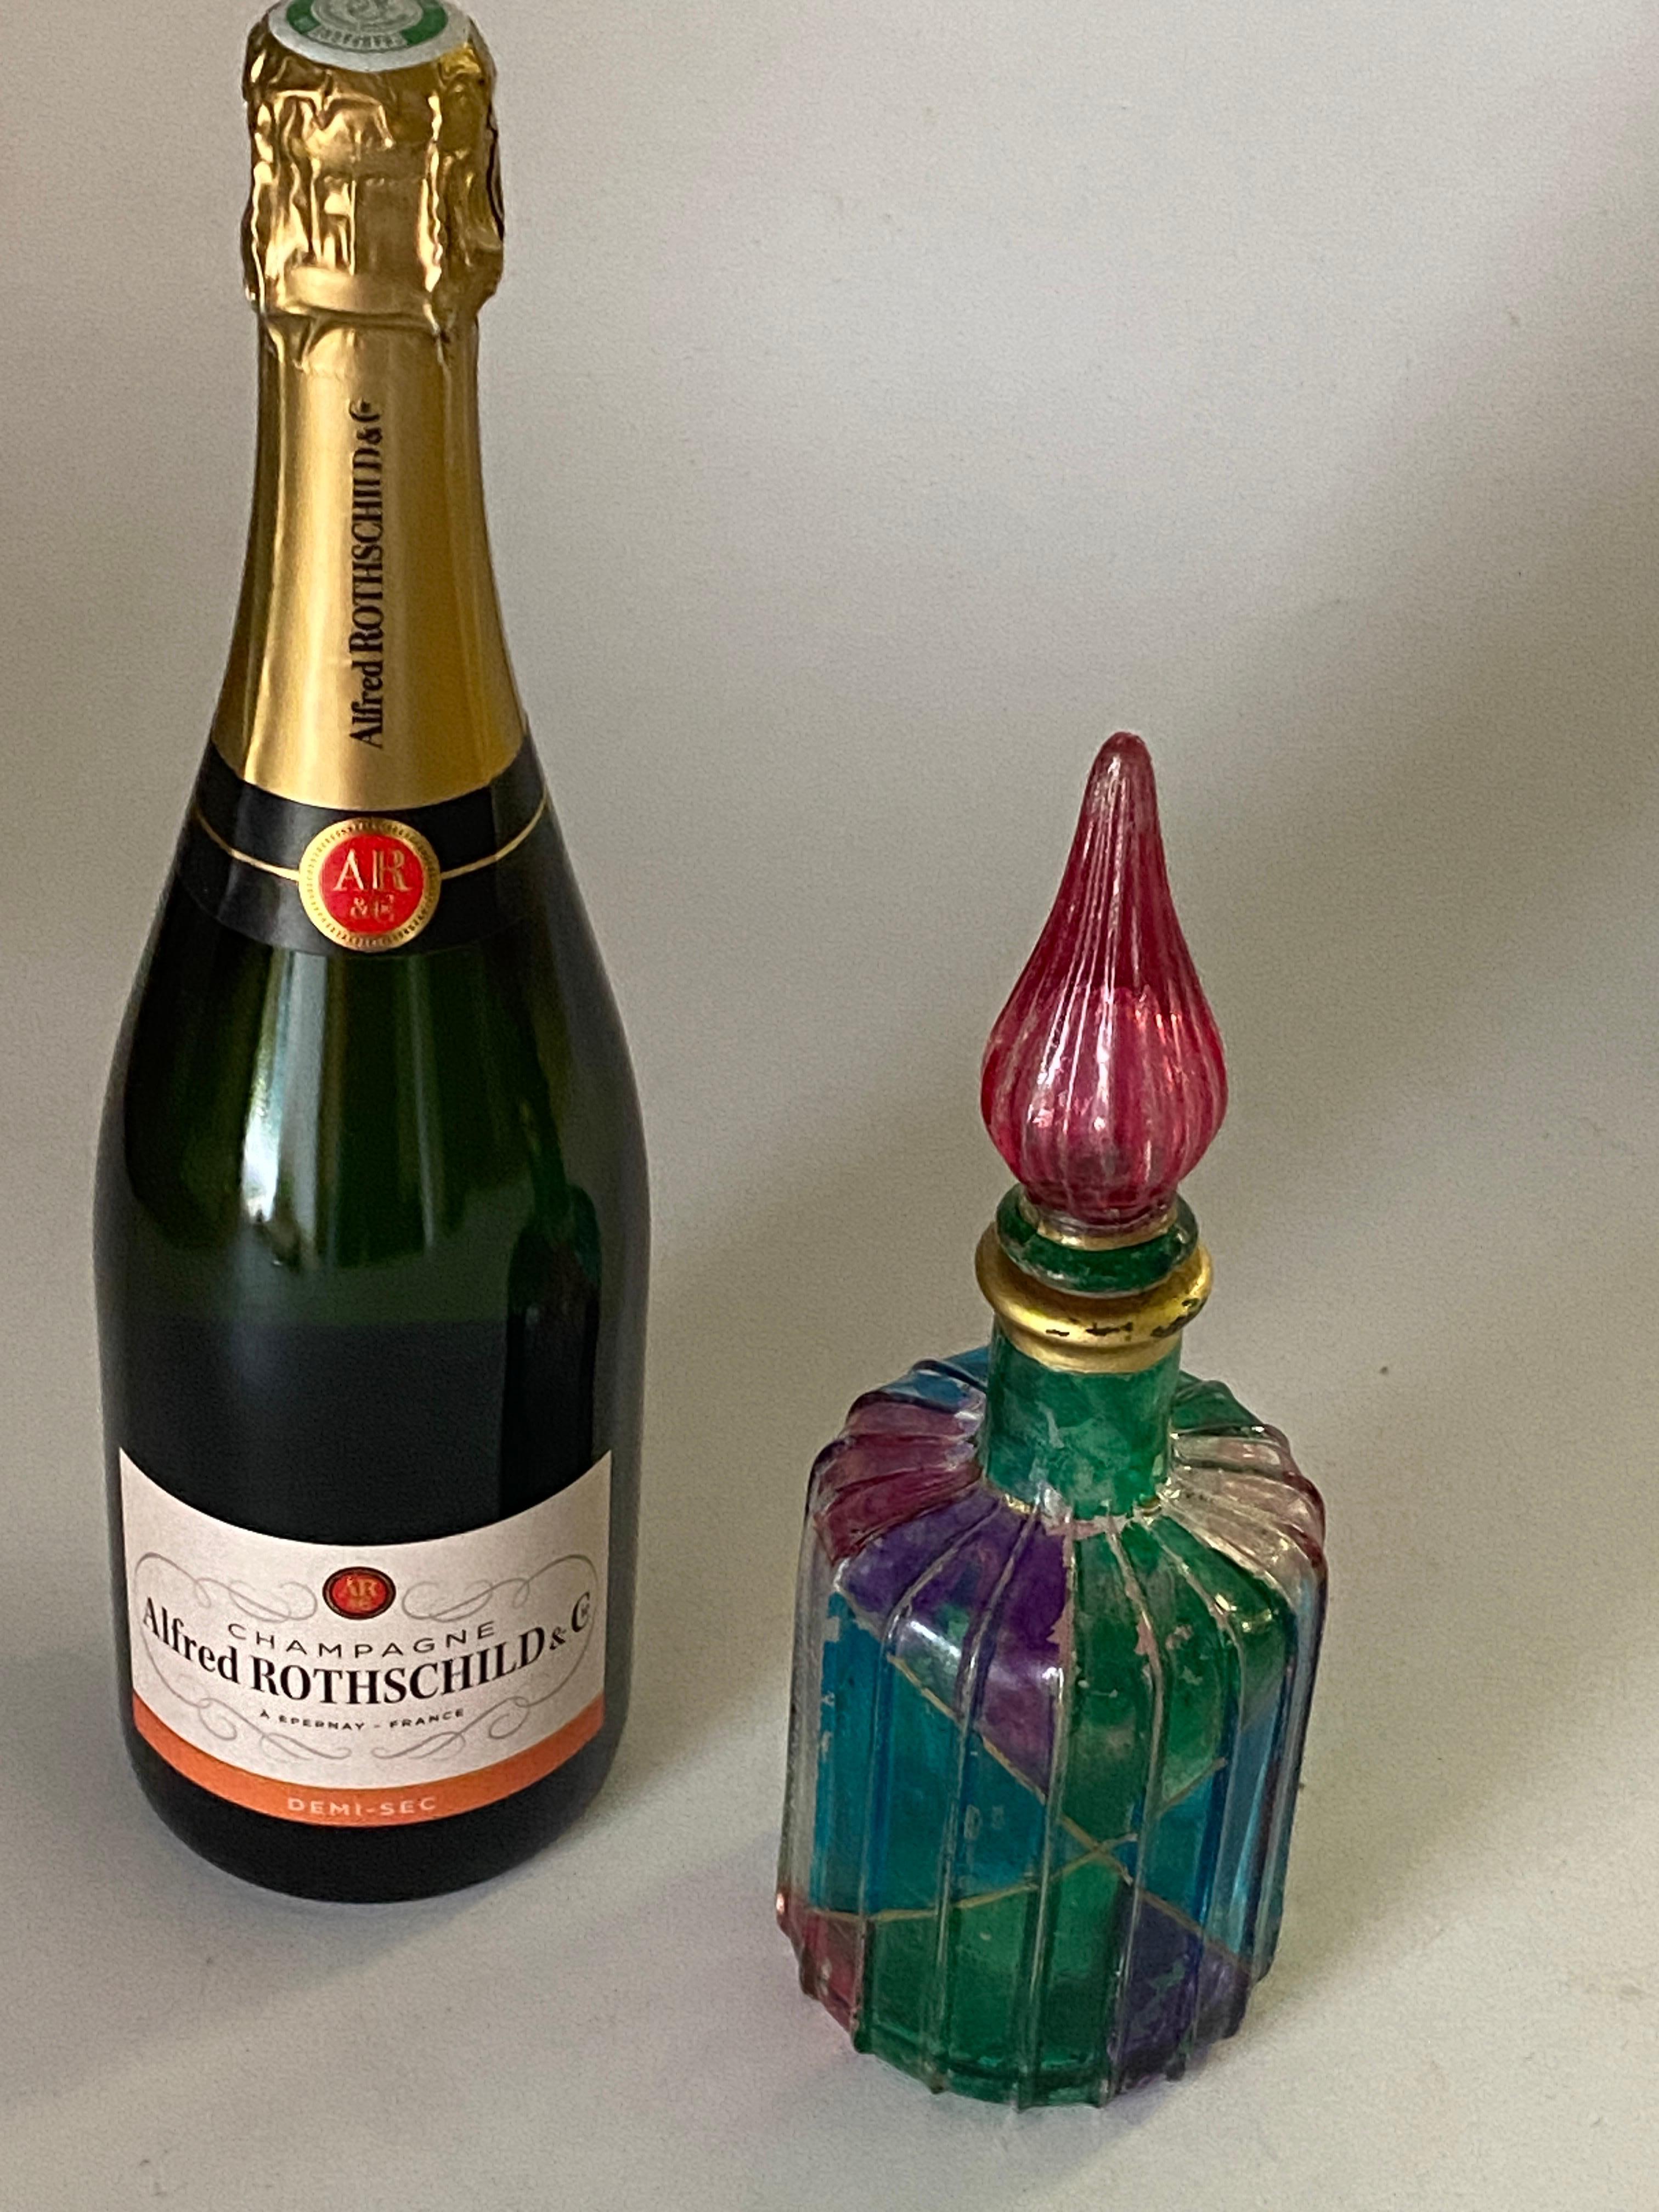 This pair of glass Decorative bottle, has been made in Italy in the 1970s.